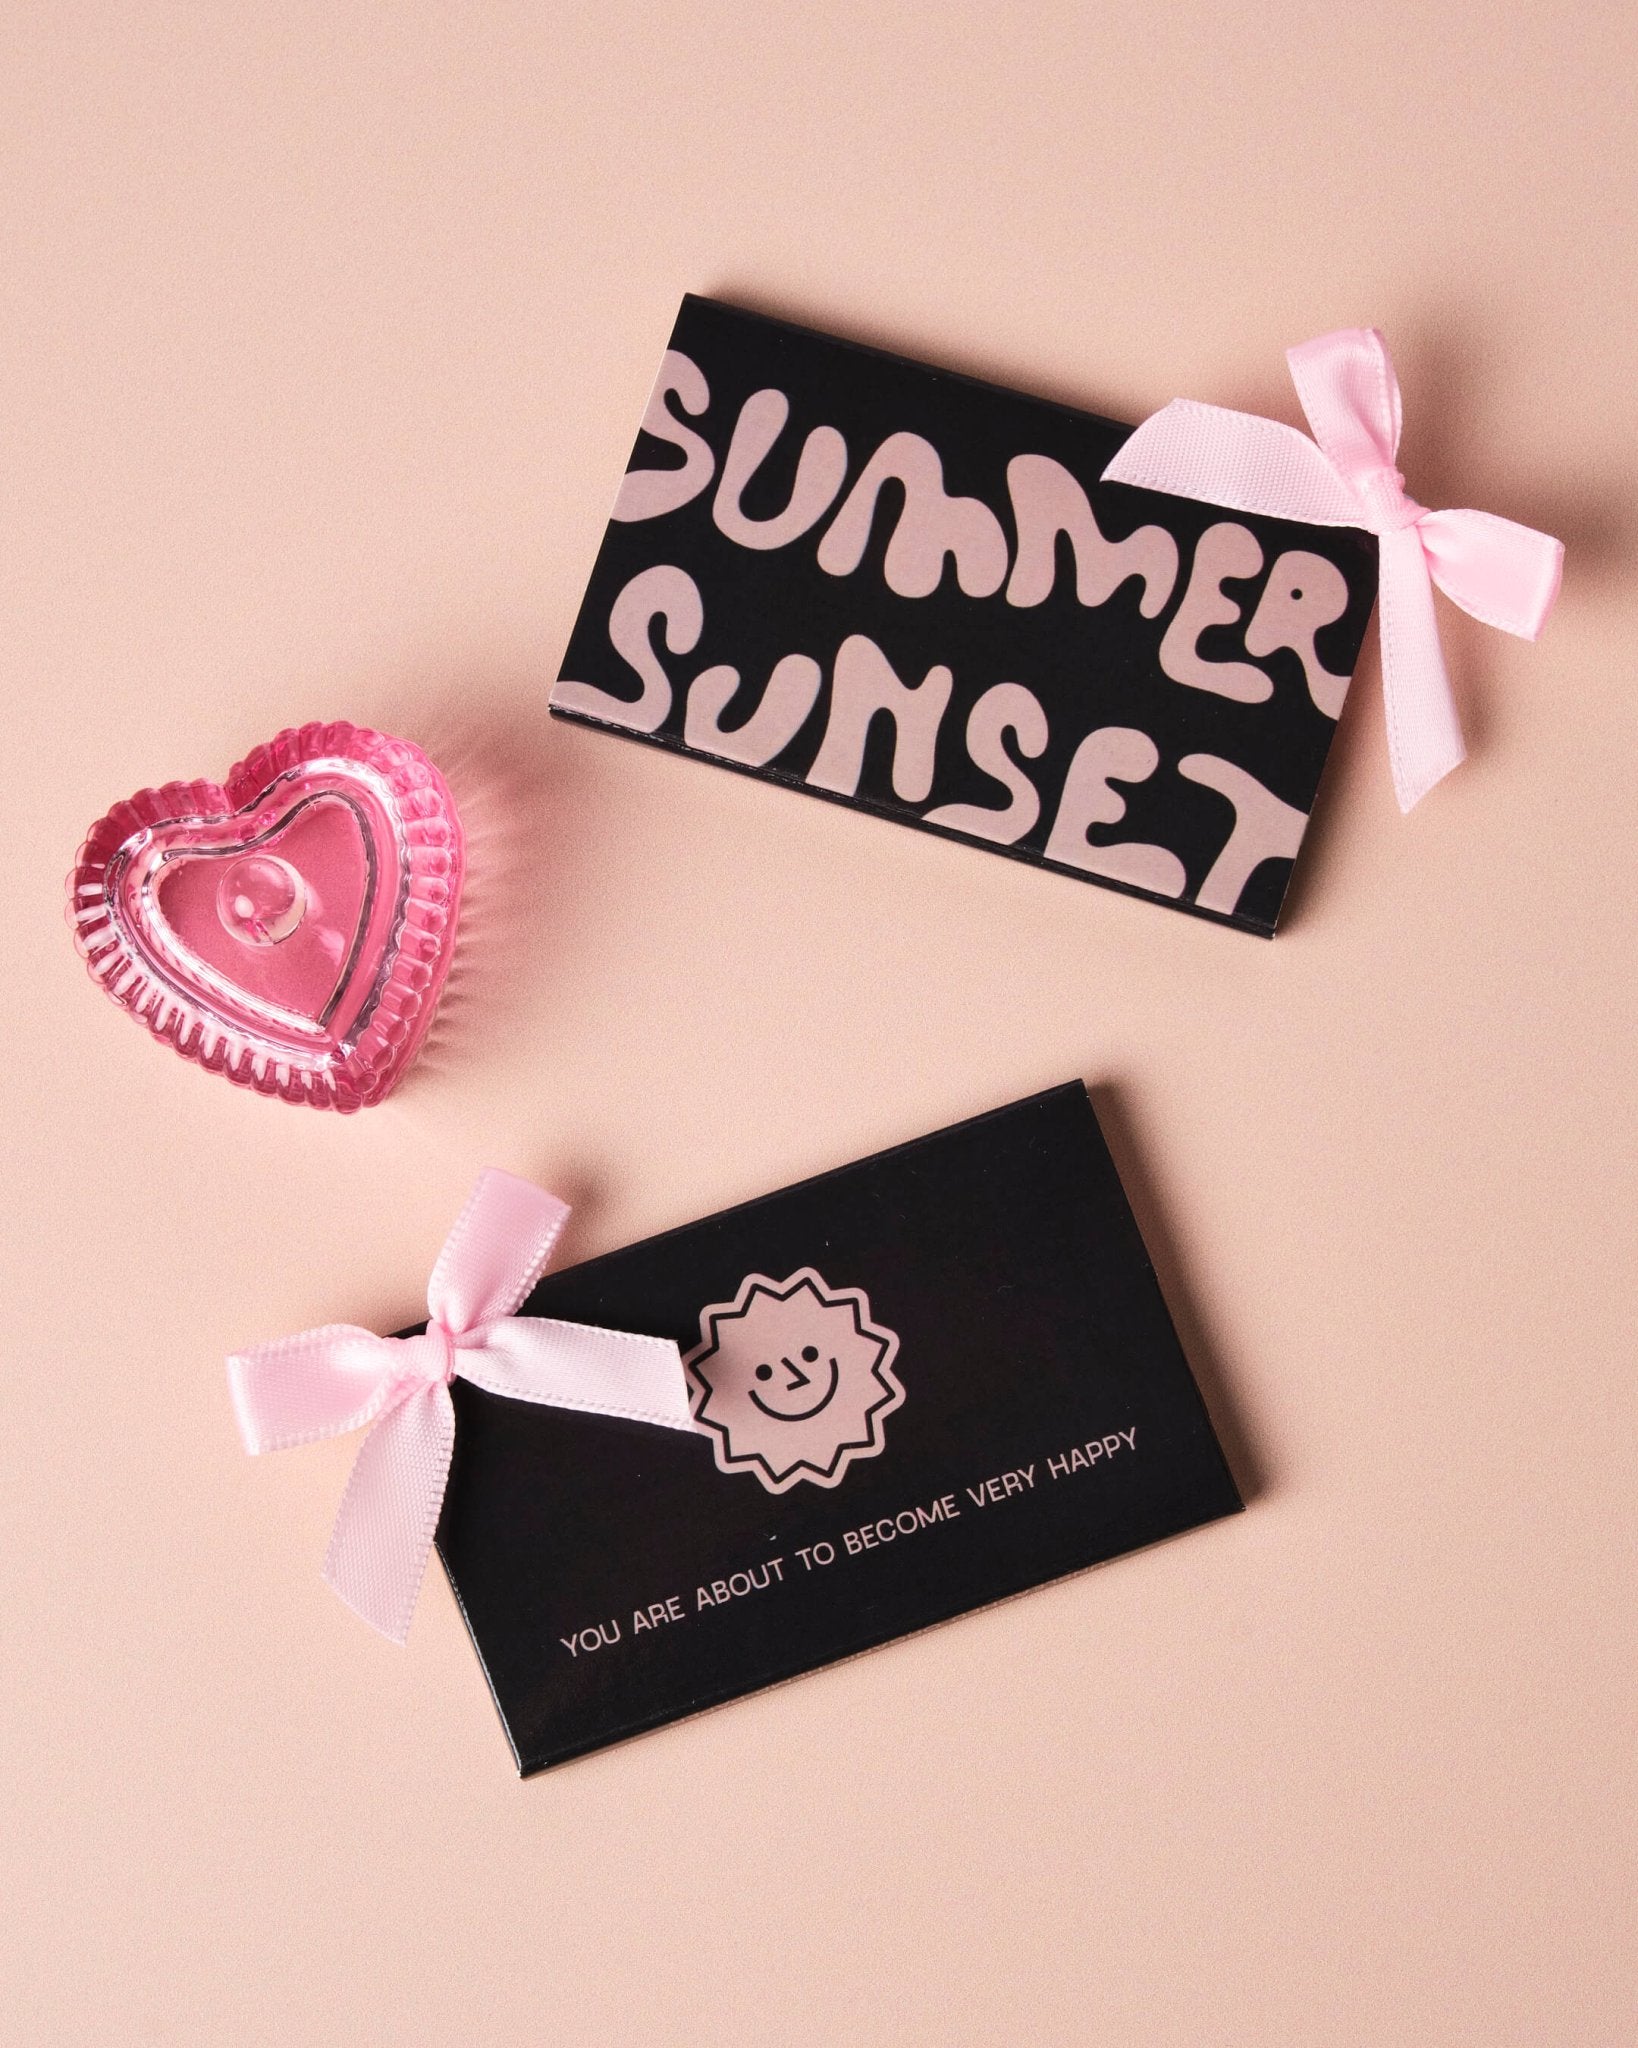 CHARCOAL ROLLING PAPER KIT (with tips) - Summer Sunset - organic hemp paper - charcoal packaging